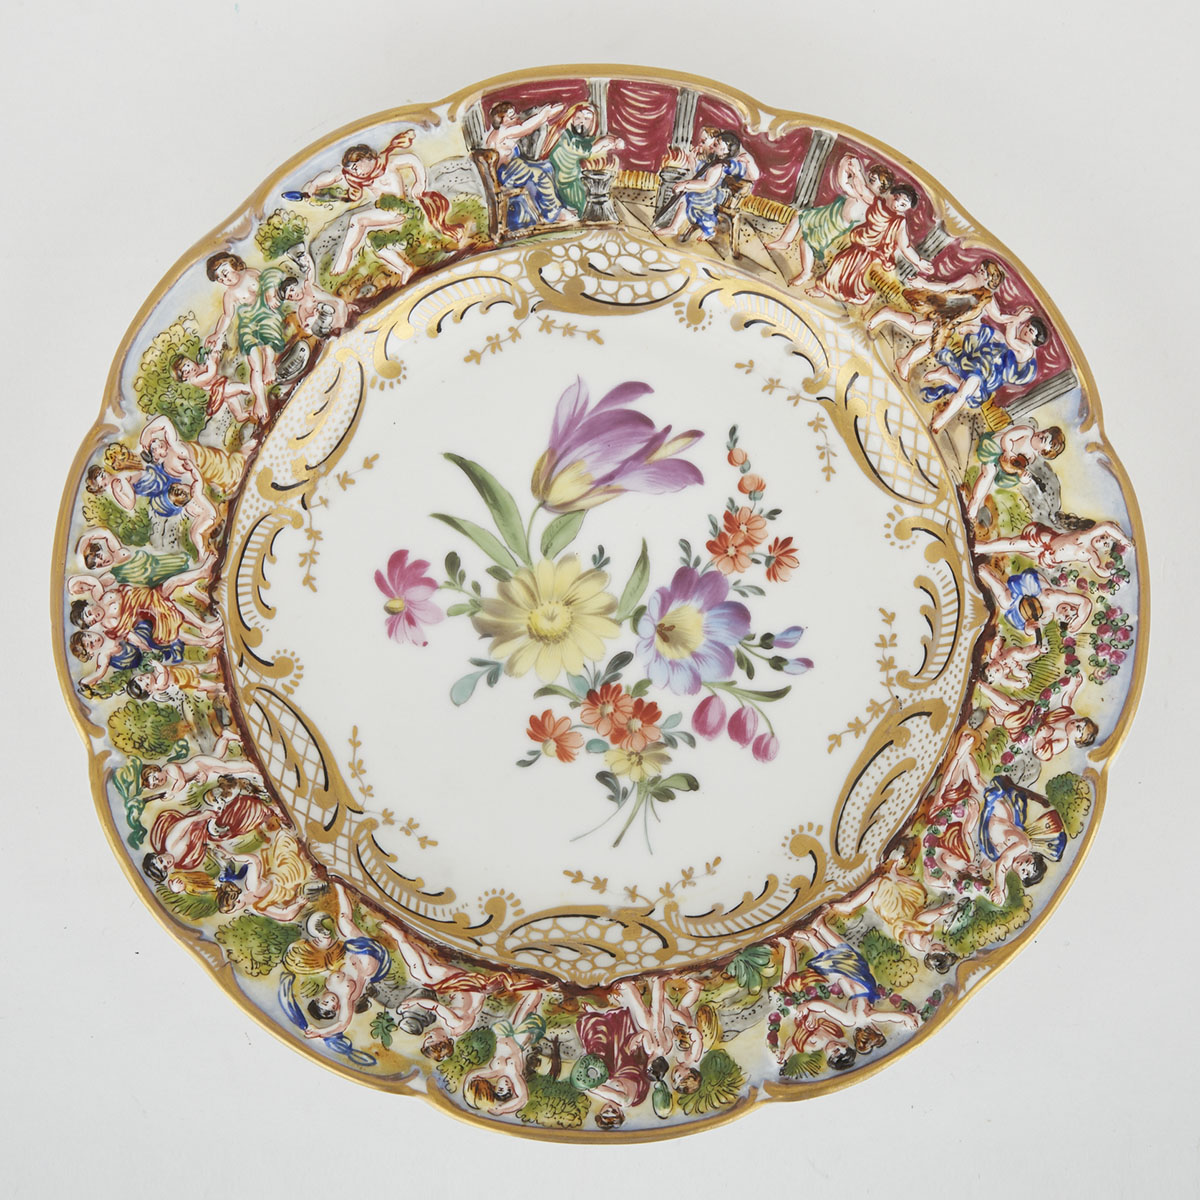 ‘Naples’ Floral Centred Plate, early 20th century